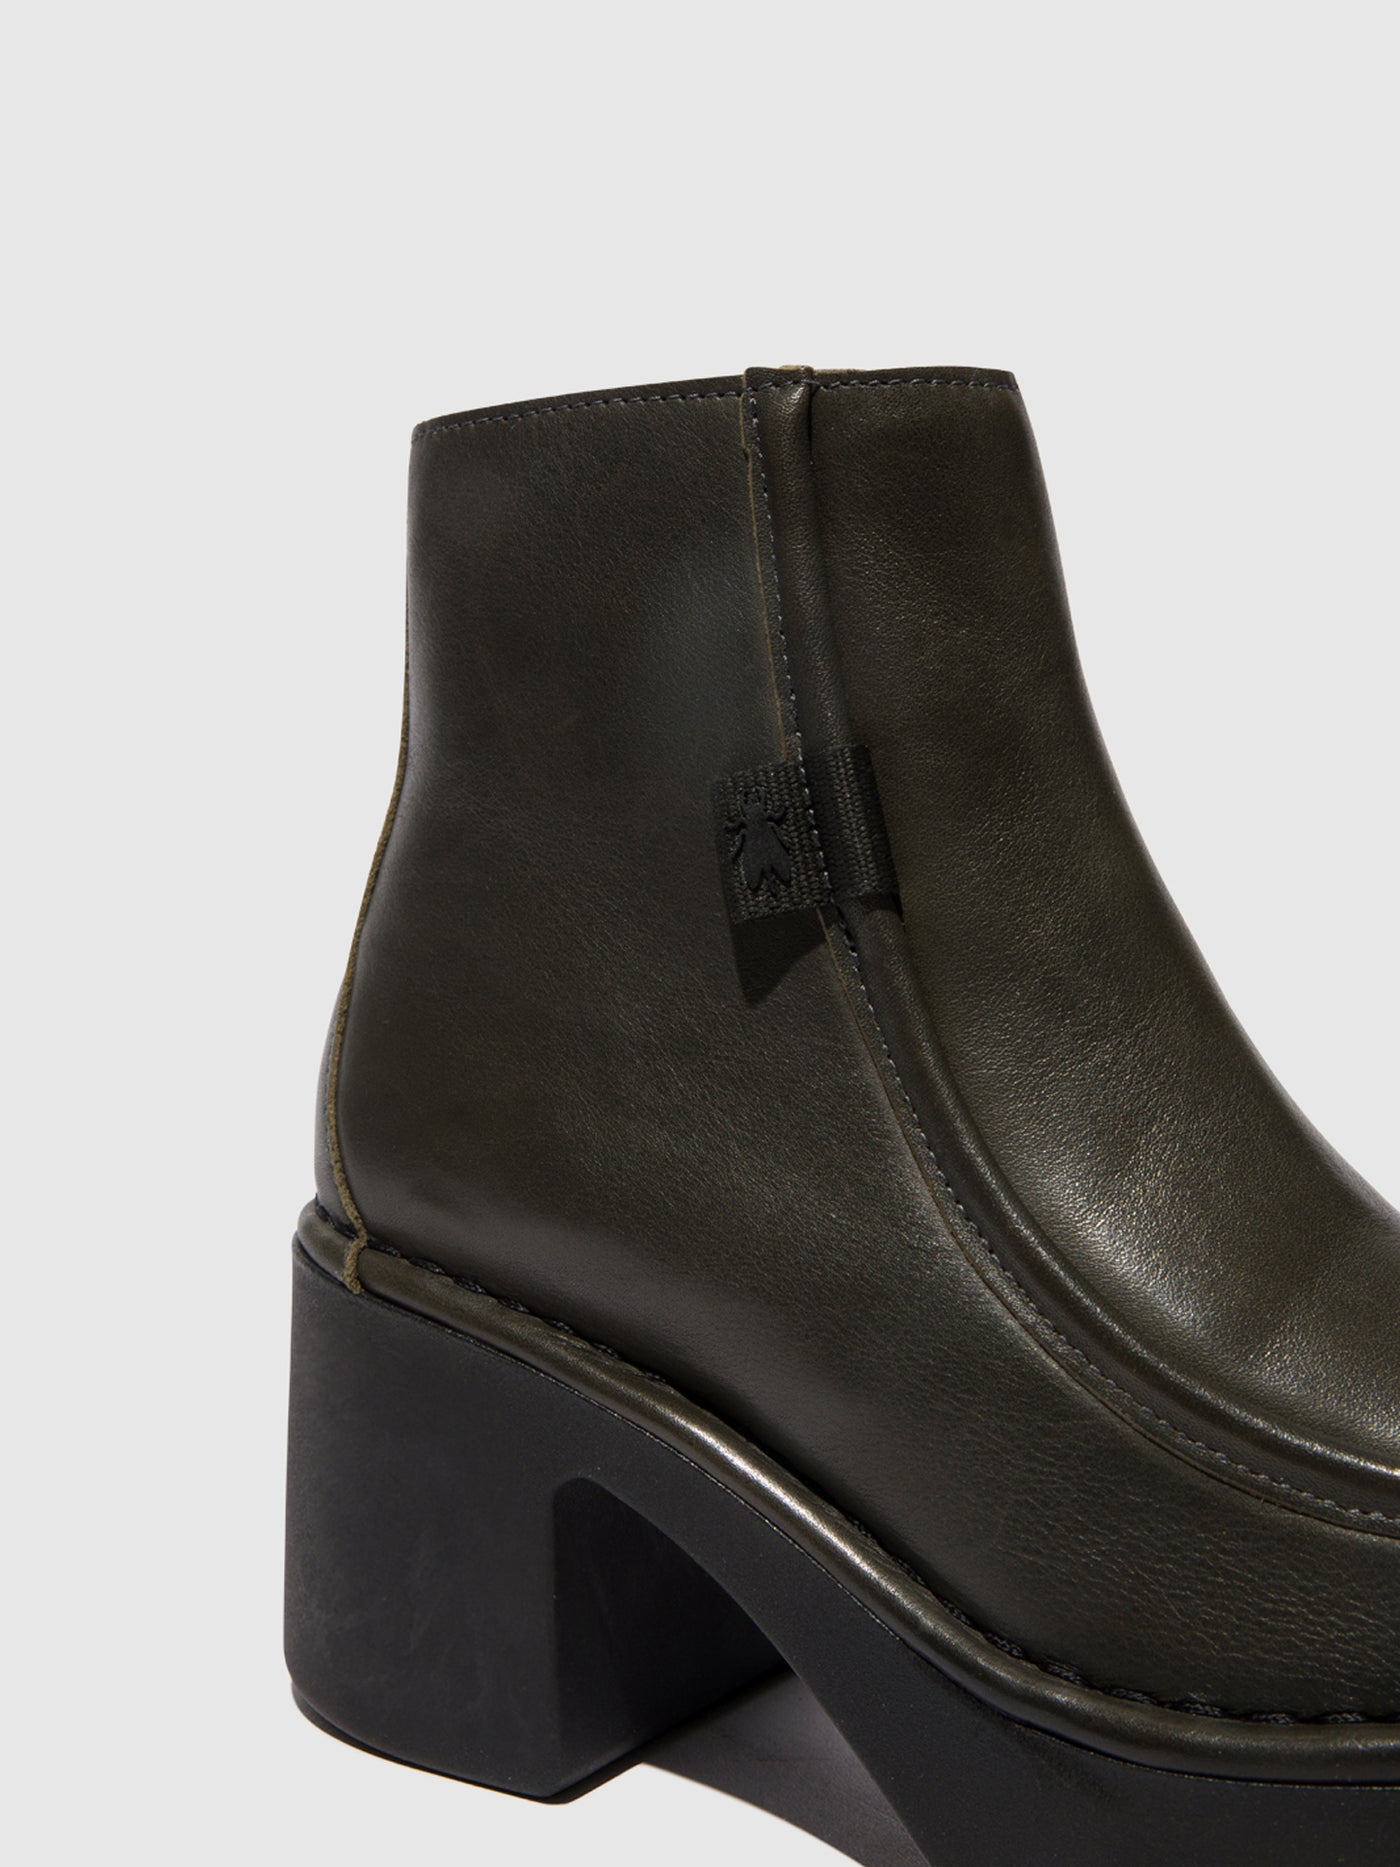 Zip Up Ankle Boots MITE249FLY DK. GREEN